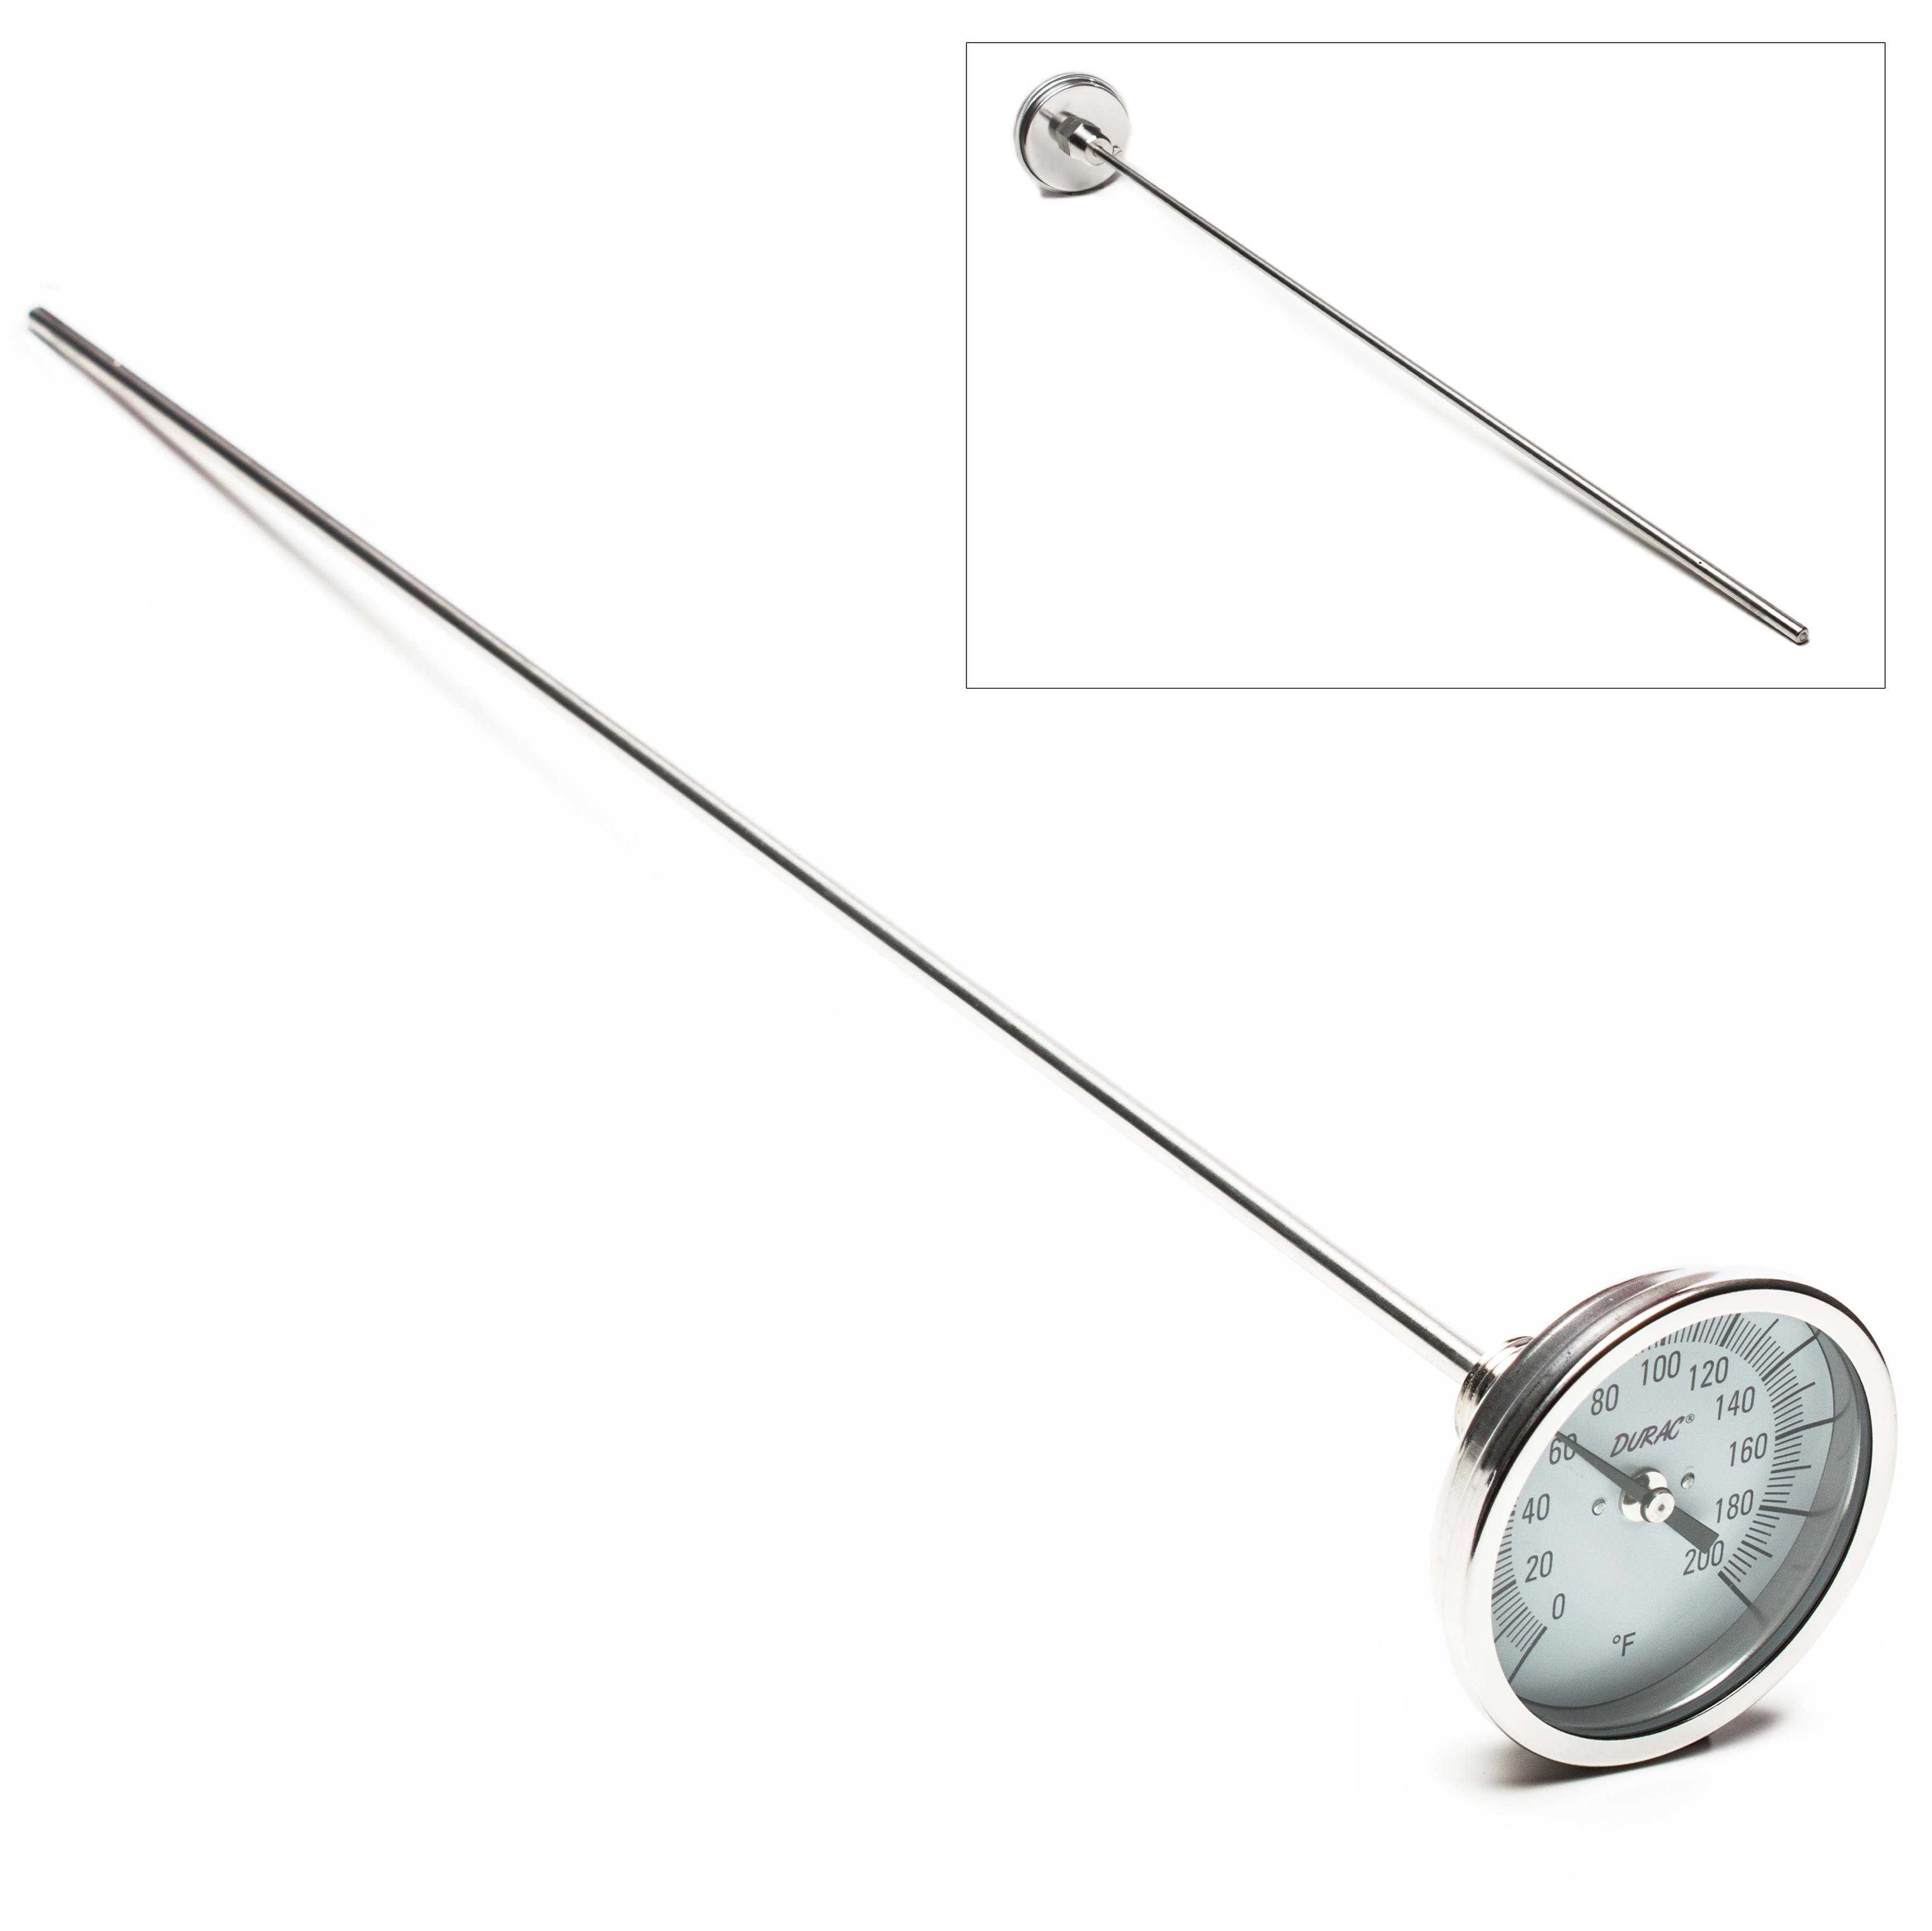 SP Bel-Art, H-B DURAC Bi-Metallic Dial Thermometer; 0 to 200F, 1/2 in. NPT Threaded Connection, 75mm Dial